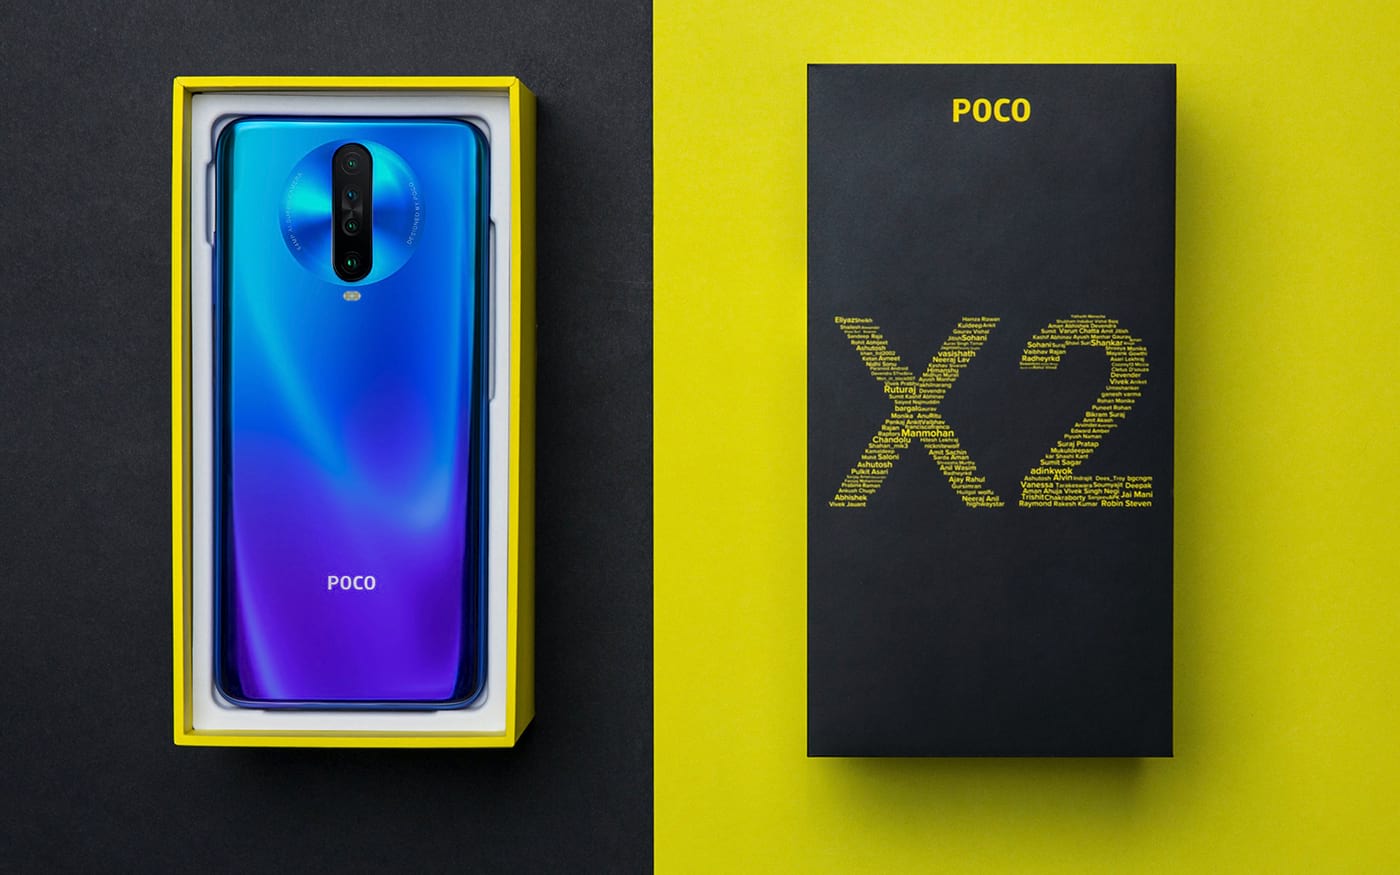 Poco X2 is announced with 120 Hz screen, Snapdragon 730G and 64MP camera